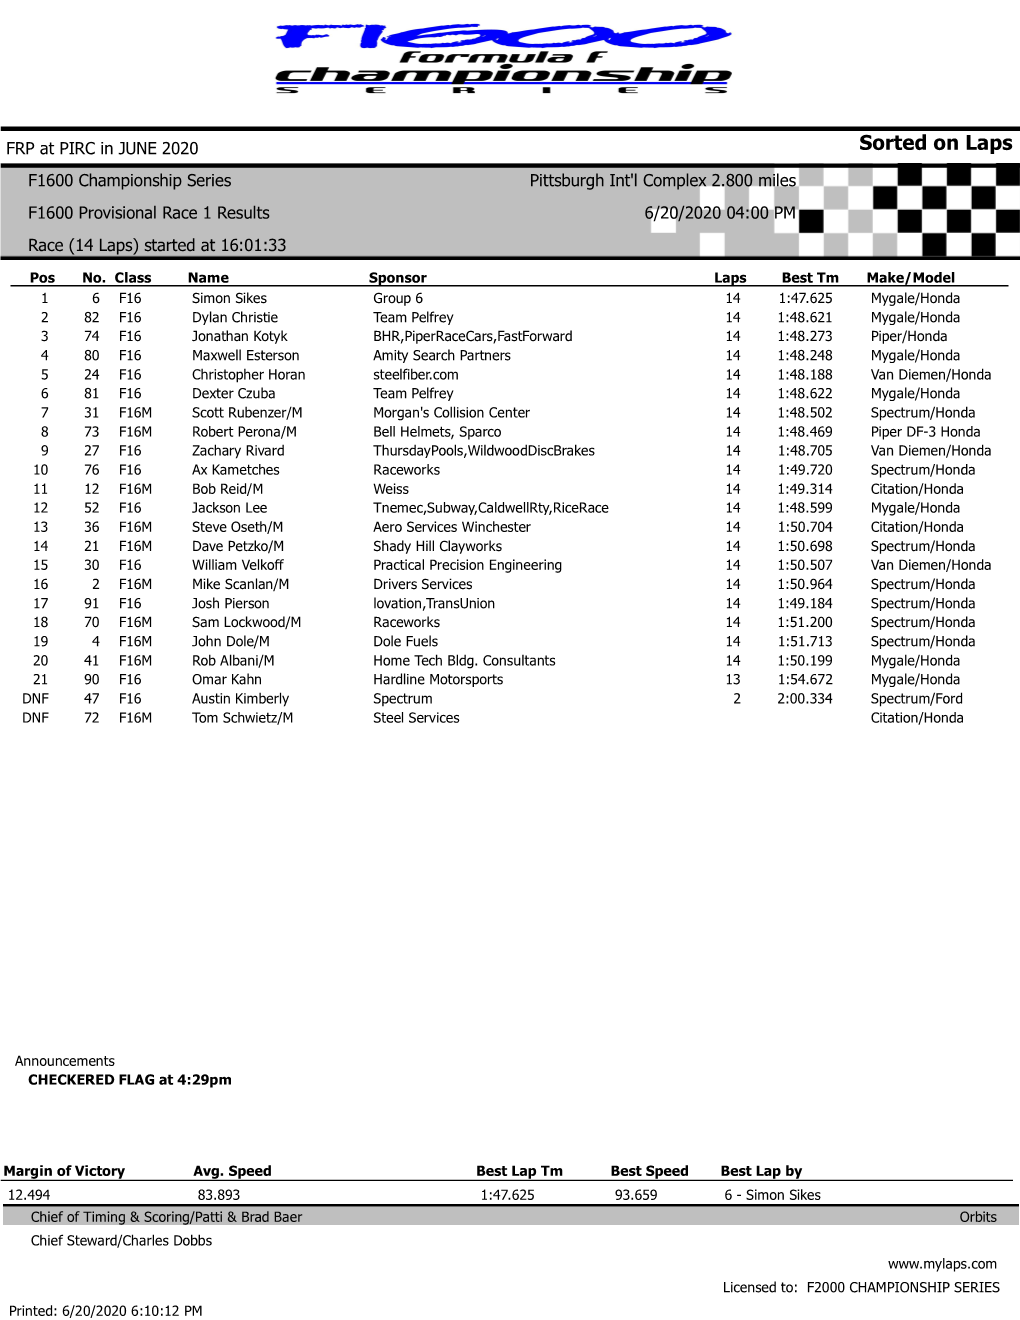 Sorted on Laps F1600 Championship Series Pittsburgh Int'l Complex 2.800 Miles F1600 Provisional Race 1 Results 6/20/2020 04:00 PM Race (14 Laps) Started at 16:01:33